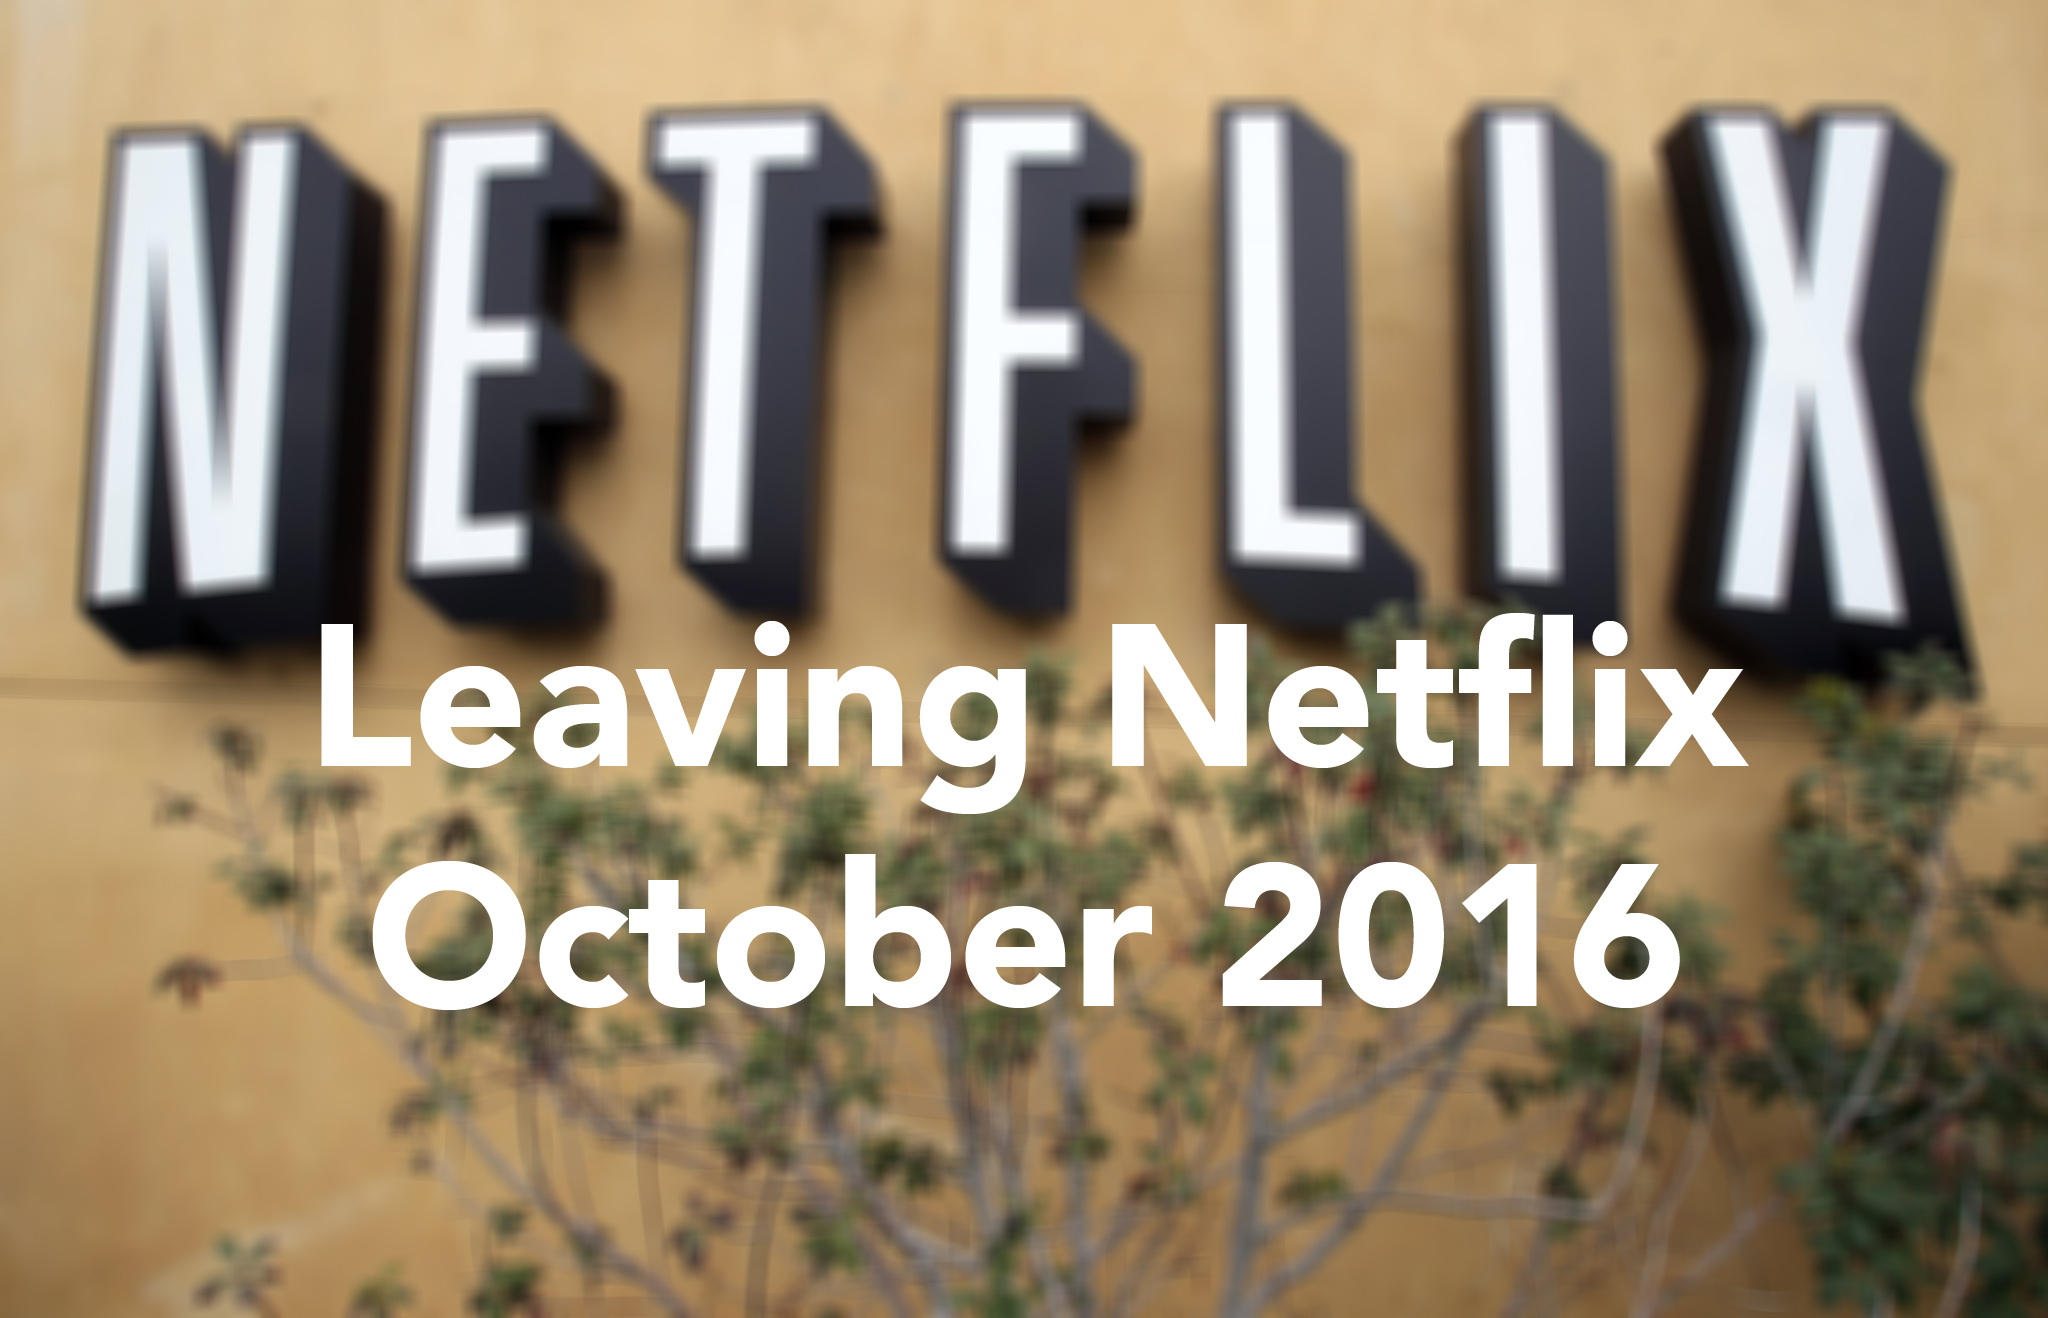 What's leaving Netflix October 2016